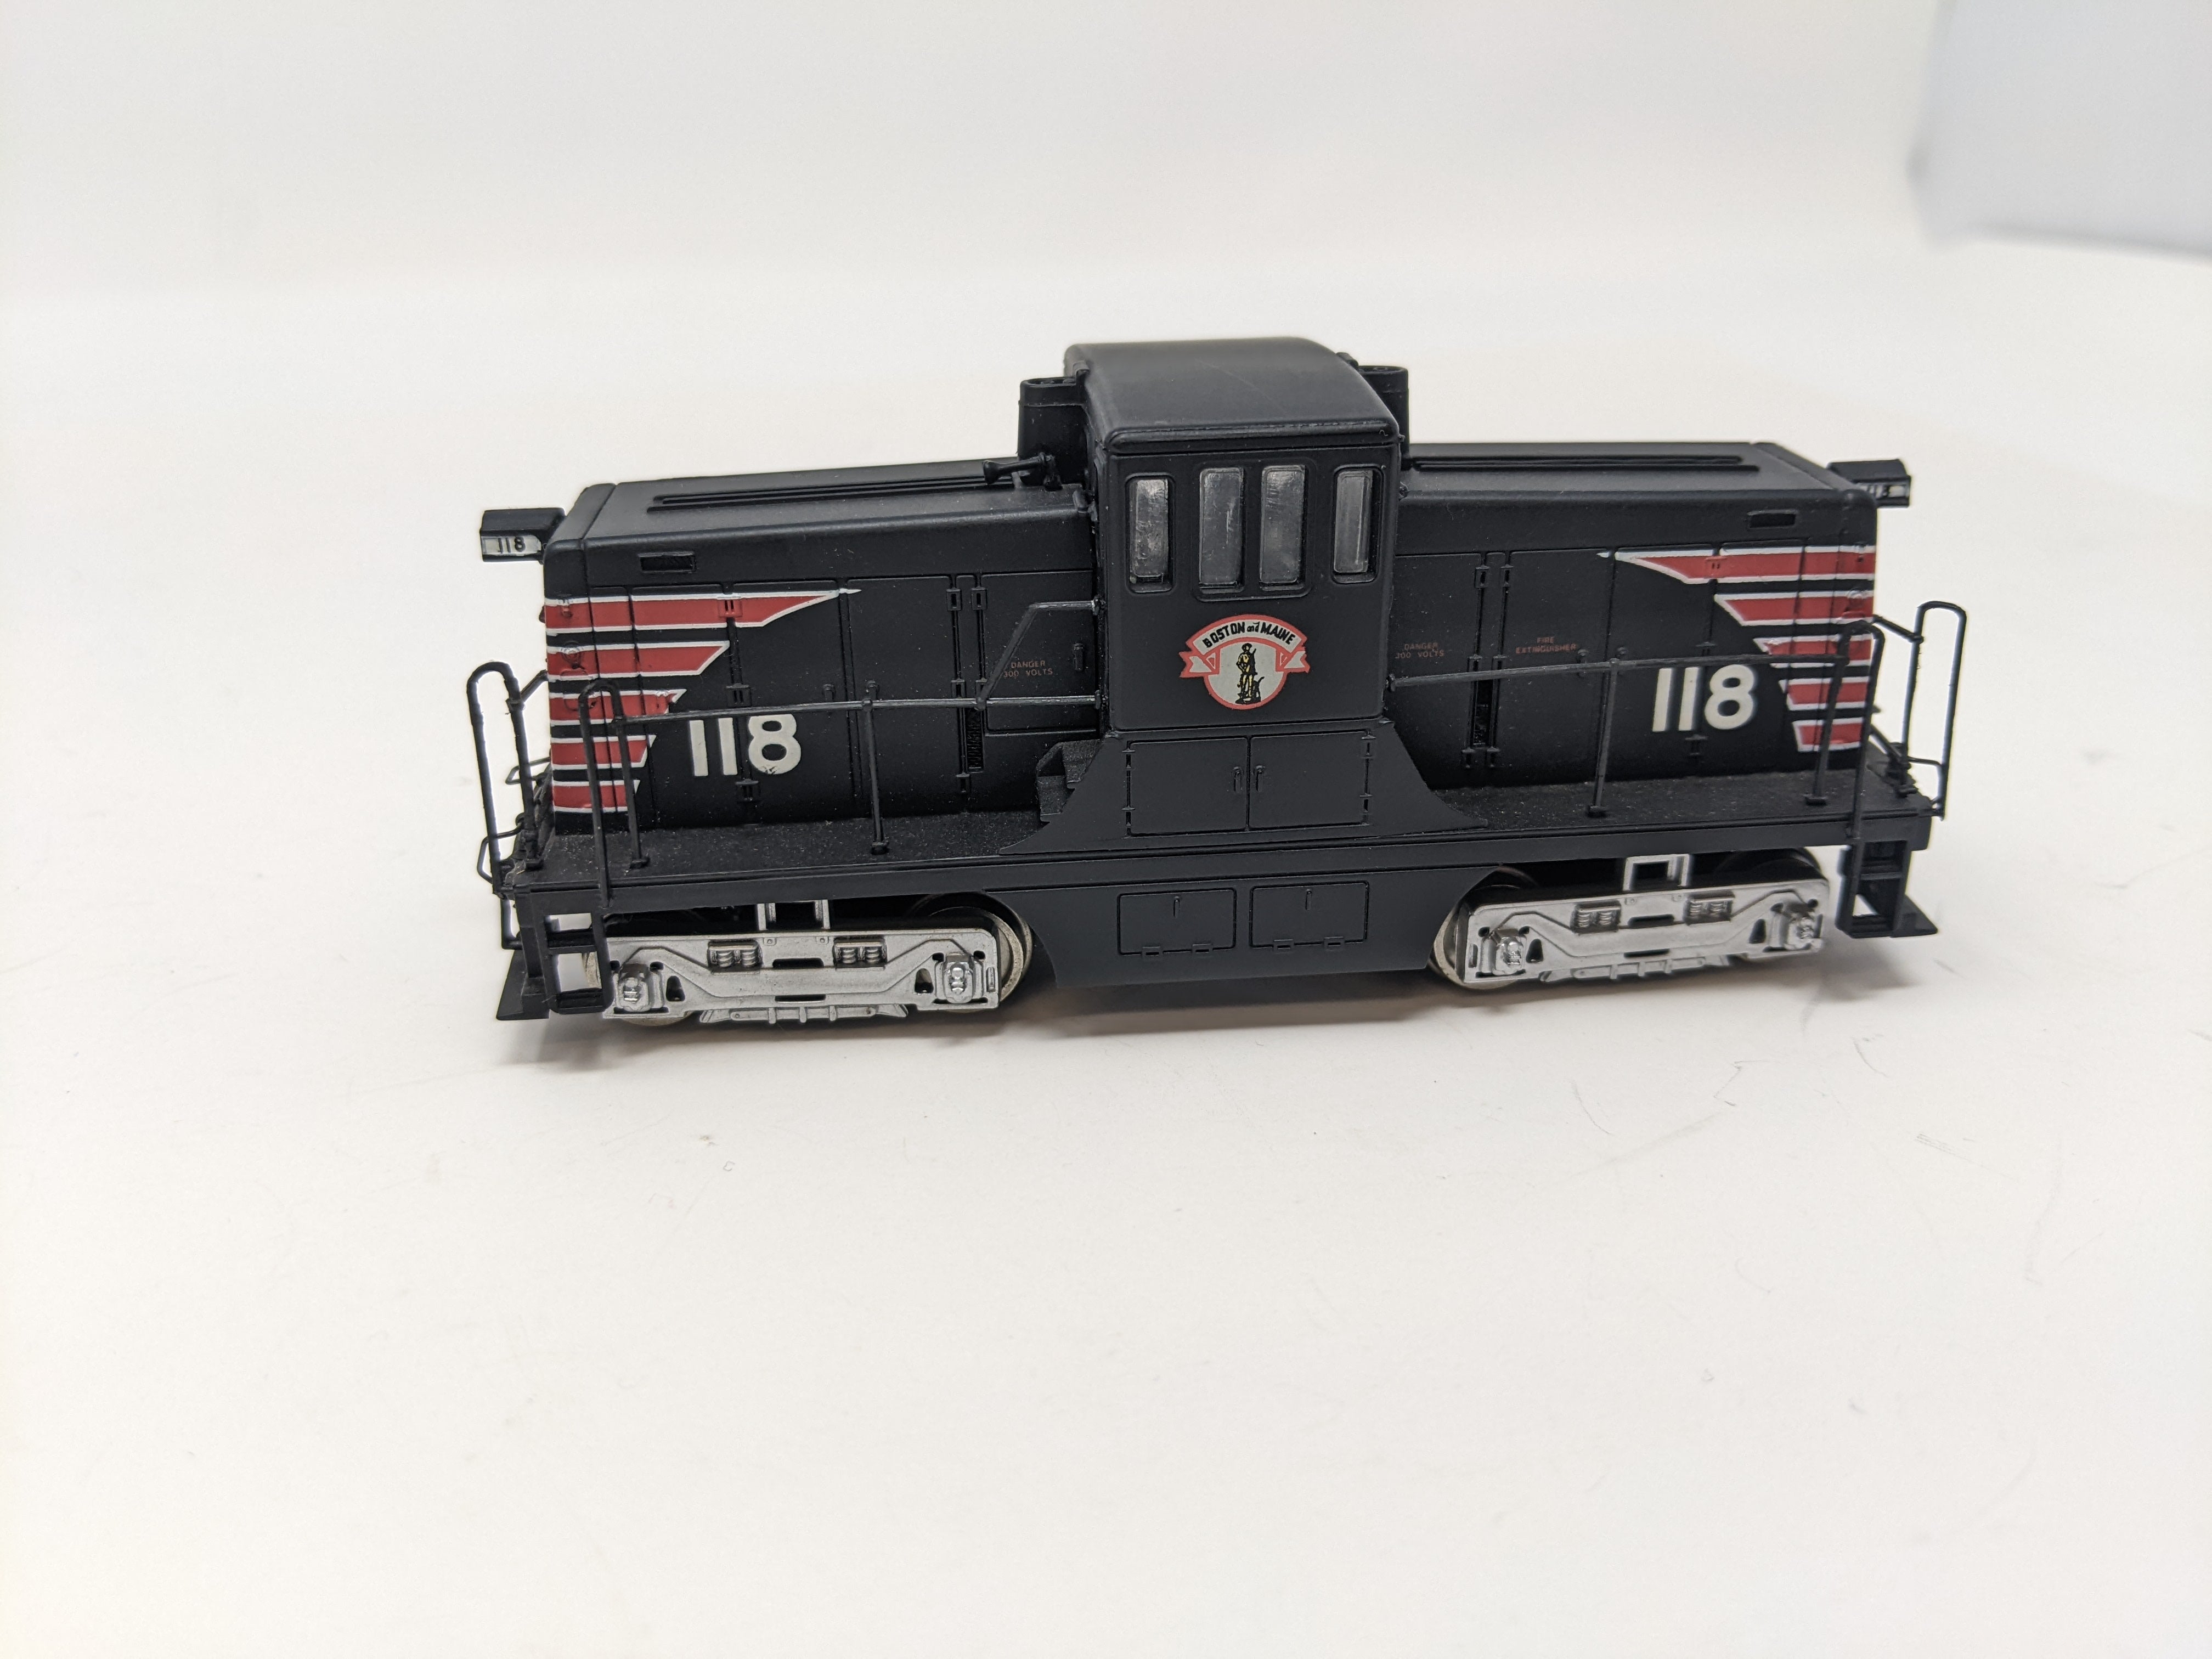 USED Bachmann 80022 HO Scale, Spectrum GE 44 Ton Diesel Switcher, Boston and Maine #118, Minuteman (DC)